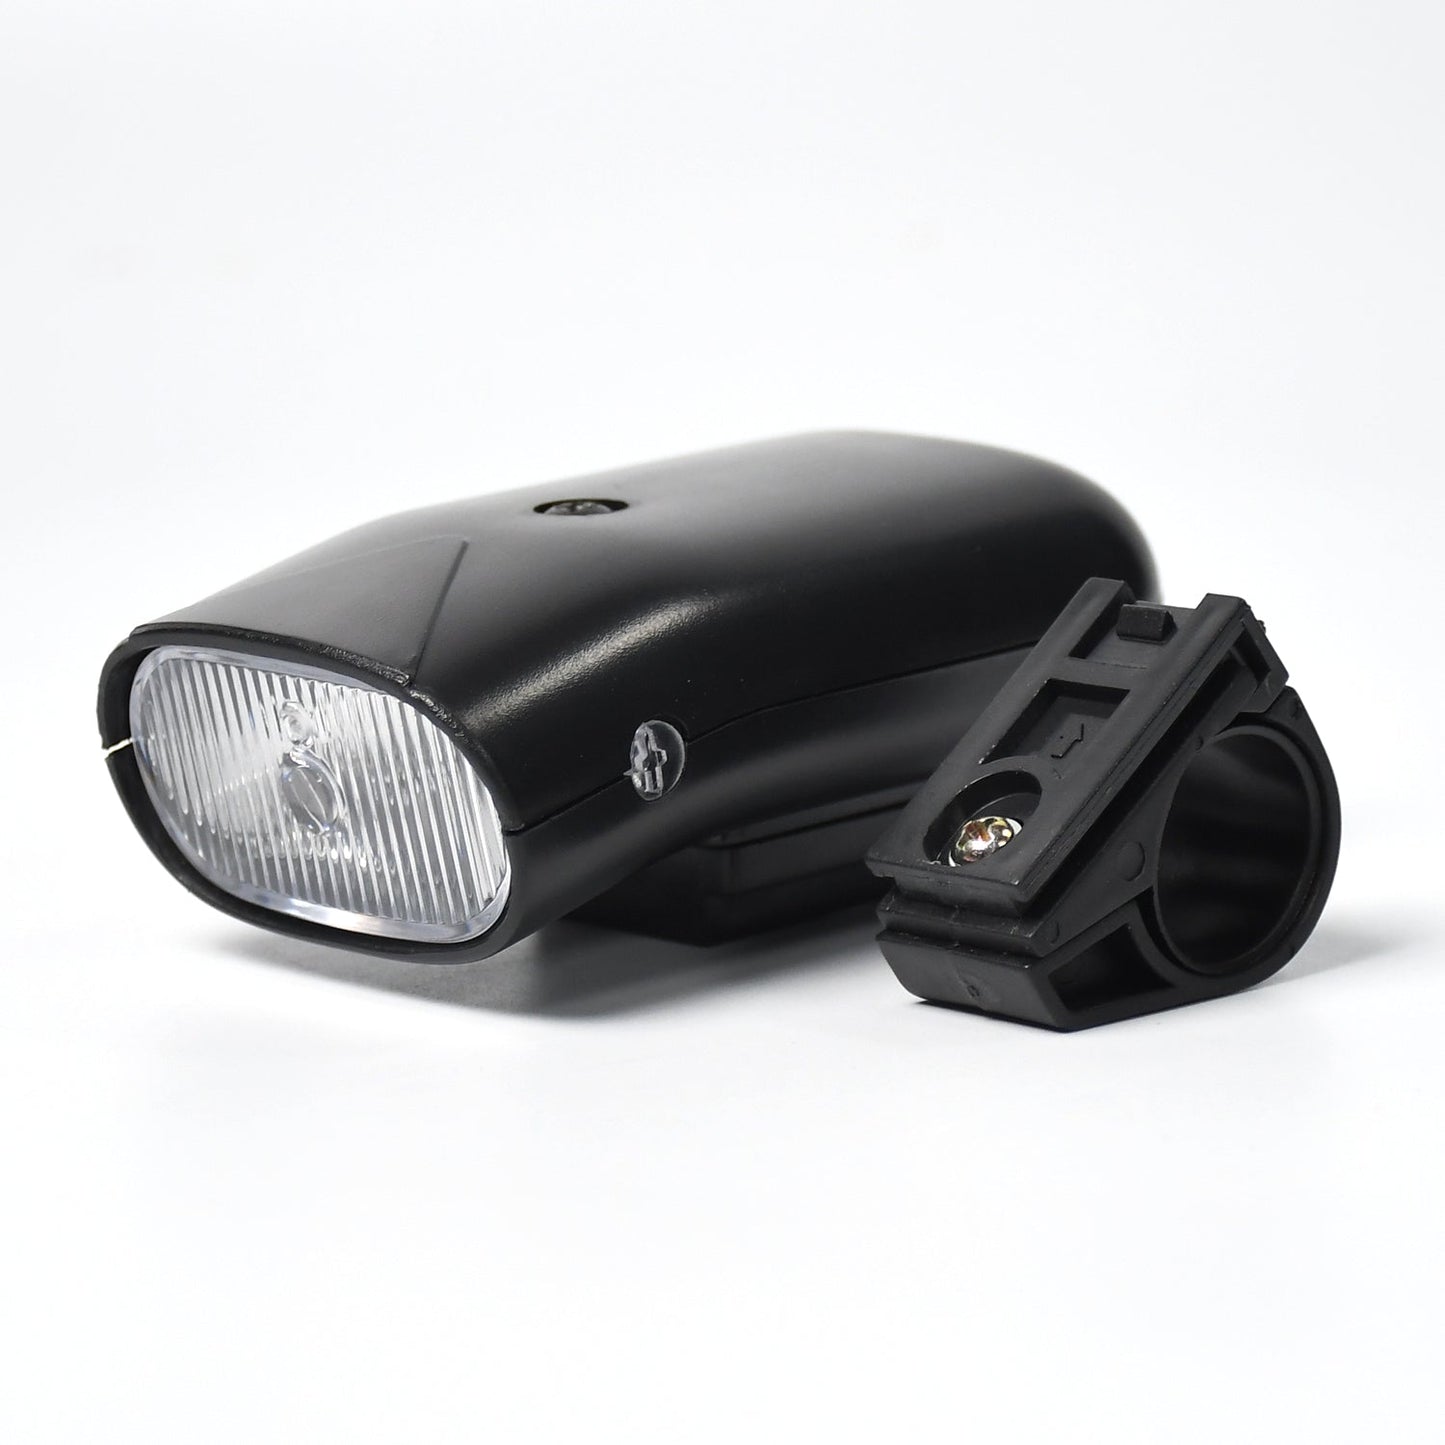 Cycle Light Waterproof Quick Release Bike Front Light Lamp Suitable For Bike & Cycle